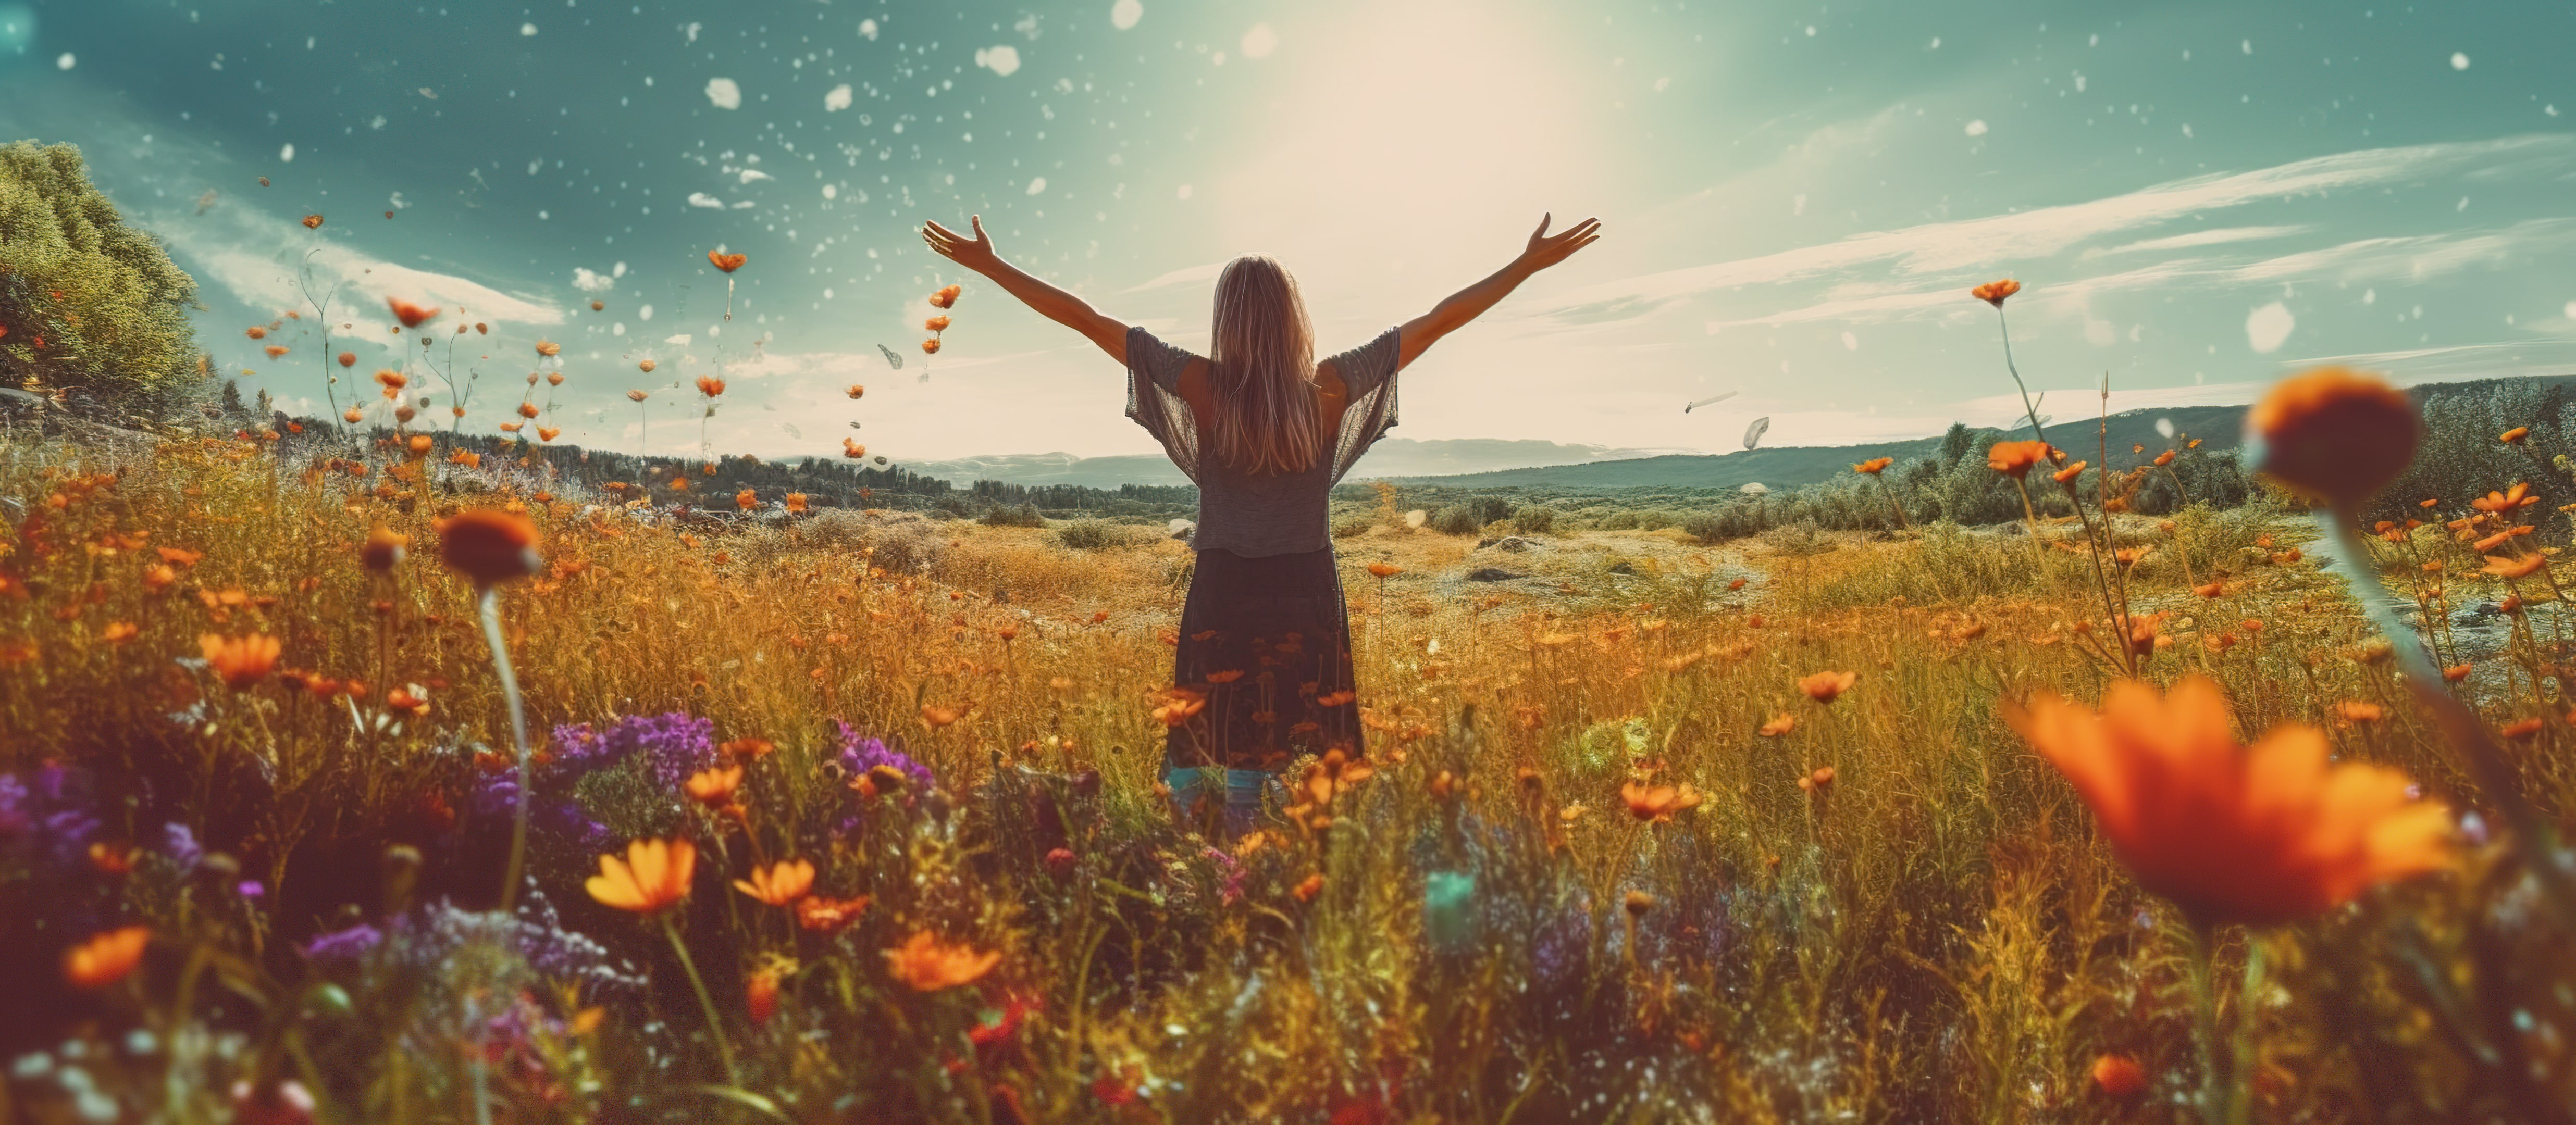 An AI generated image of a lady standing in a field of orange flowers with her arms outstretched as she dreams of what she can achieve.